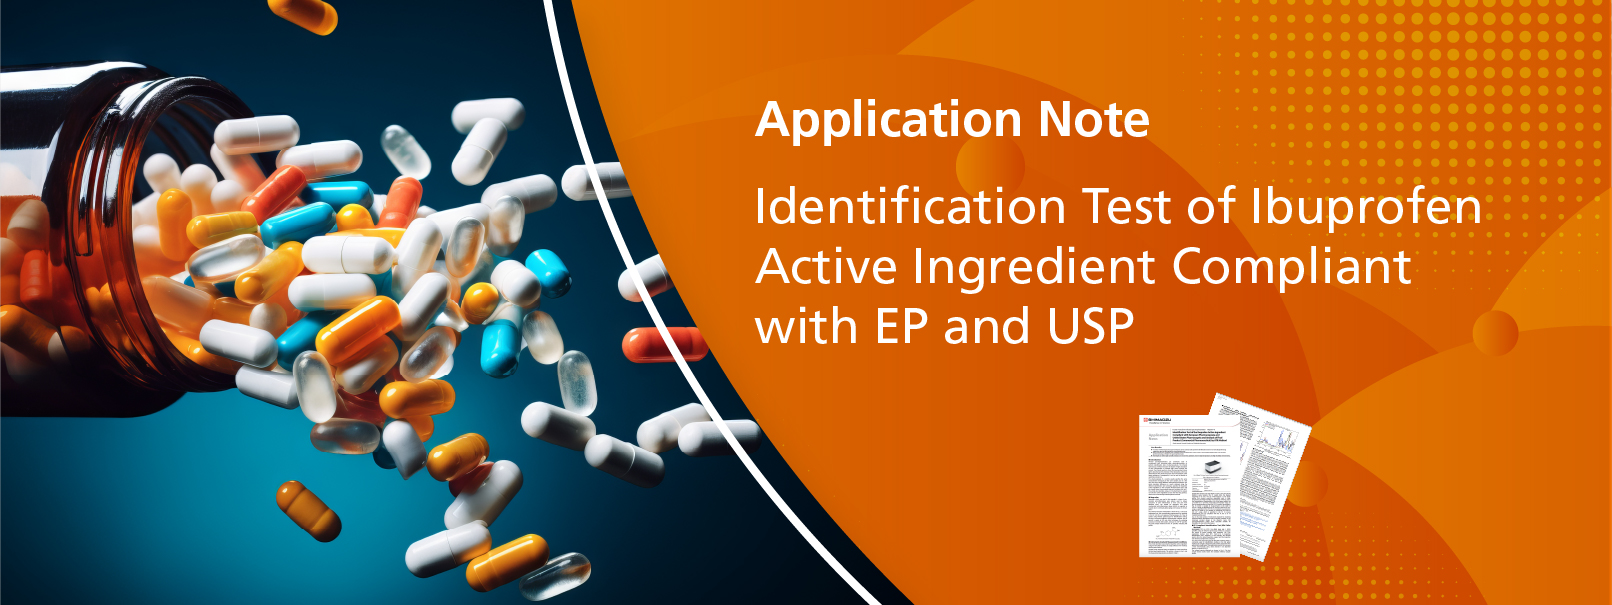 Identification Test of Ibuprofen Active Ingredient Compliant with EP and USP